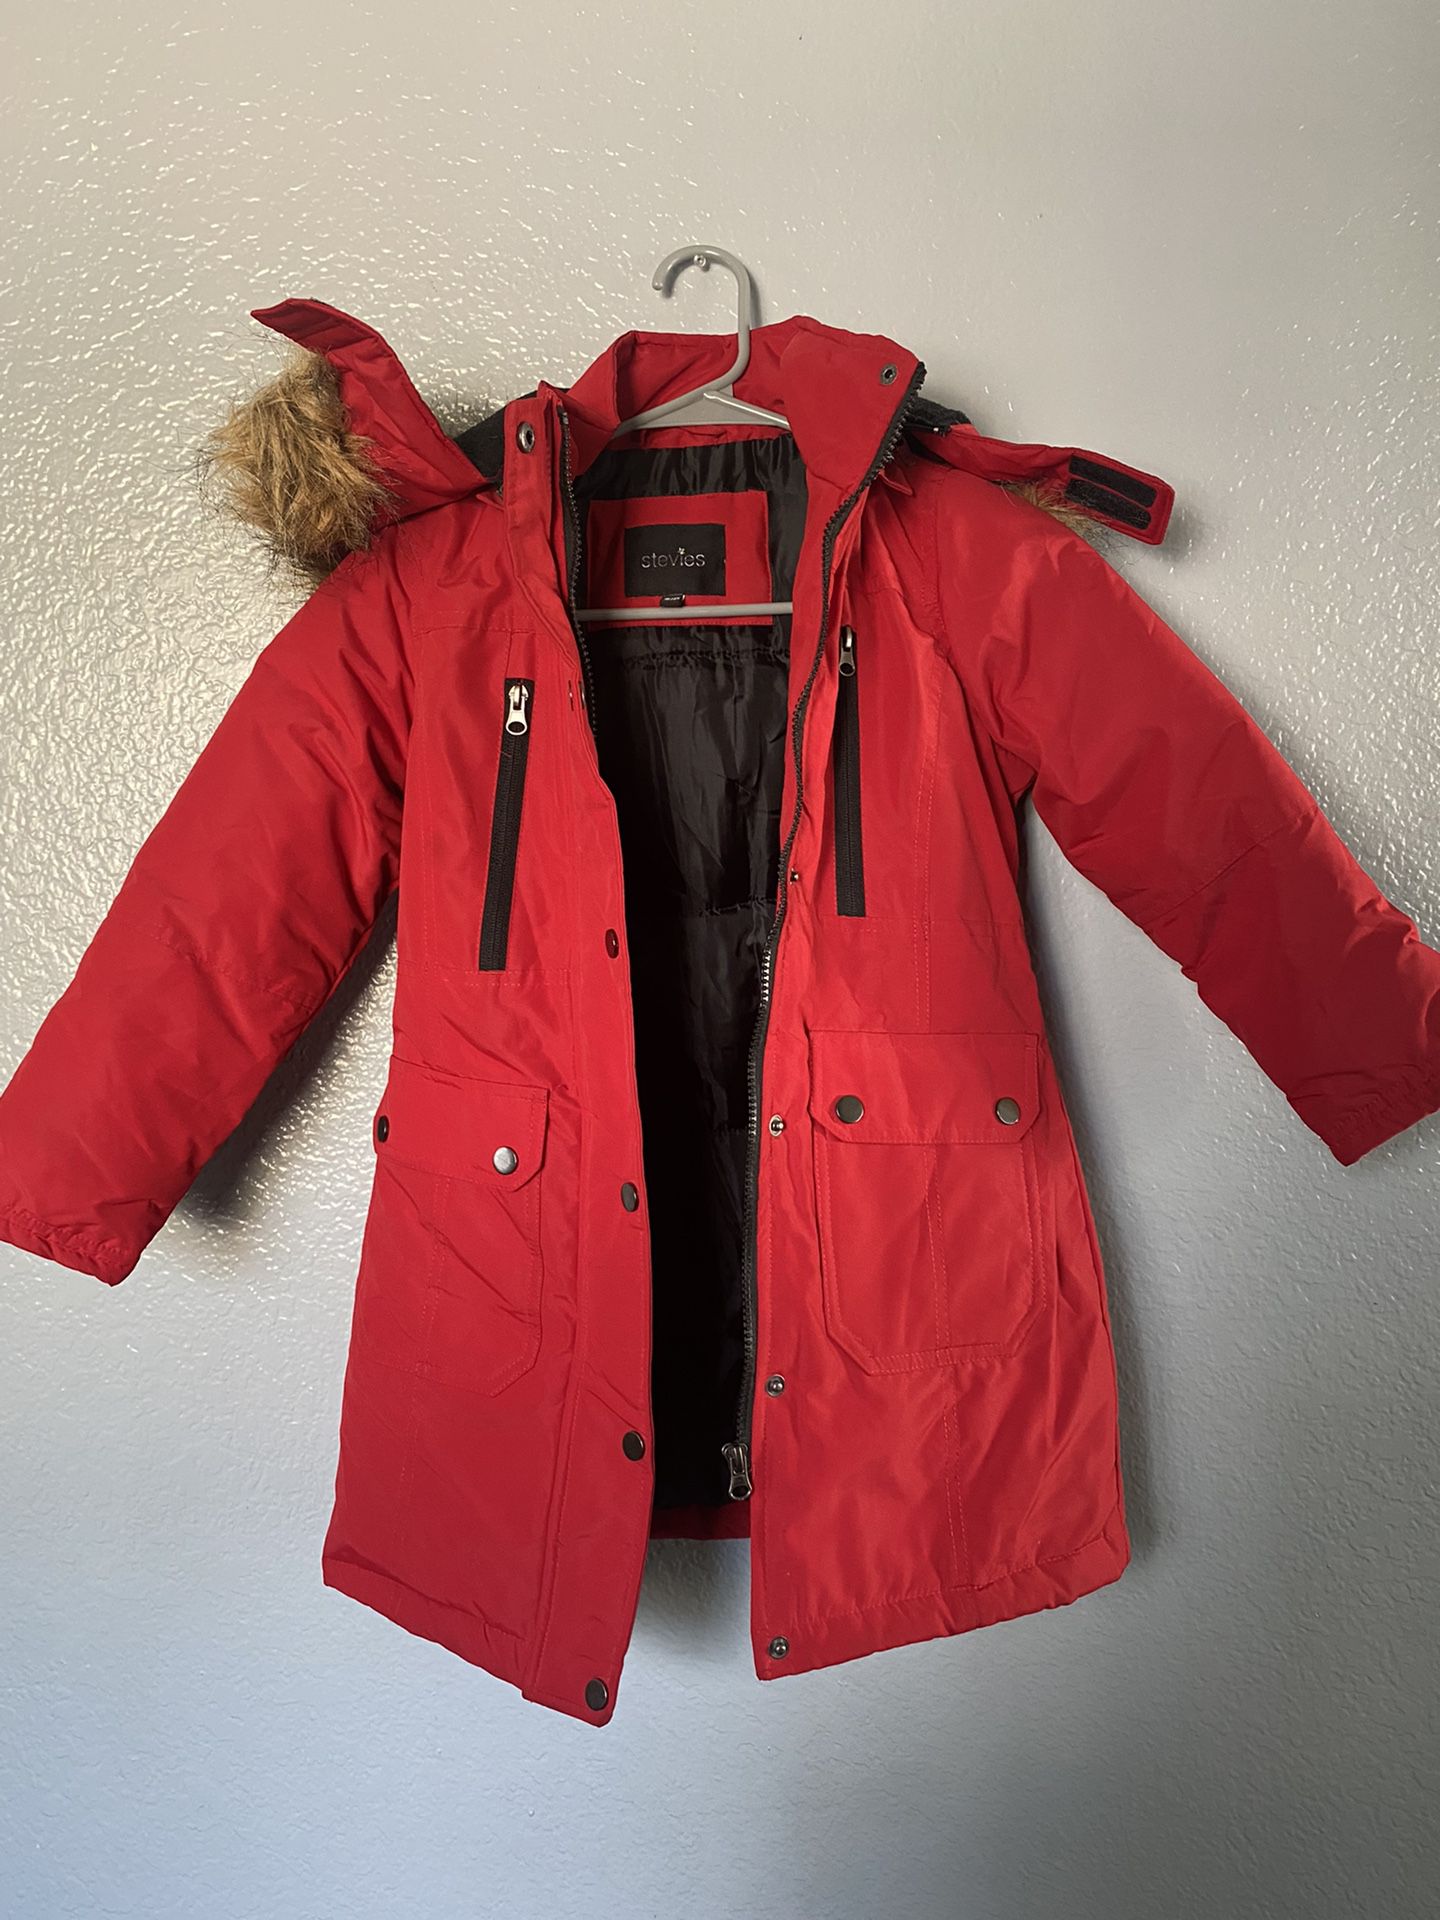 Stevie's Faux Fur Parka in Red Jacket Removable Collar